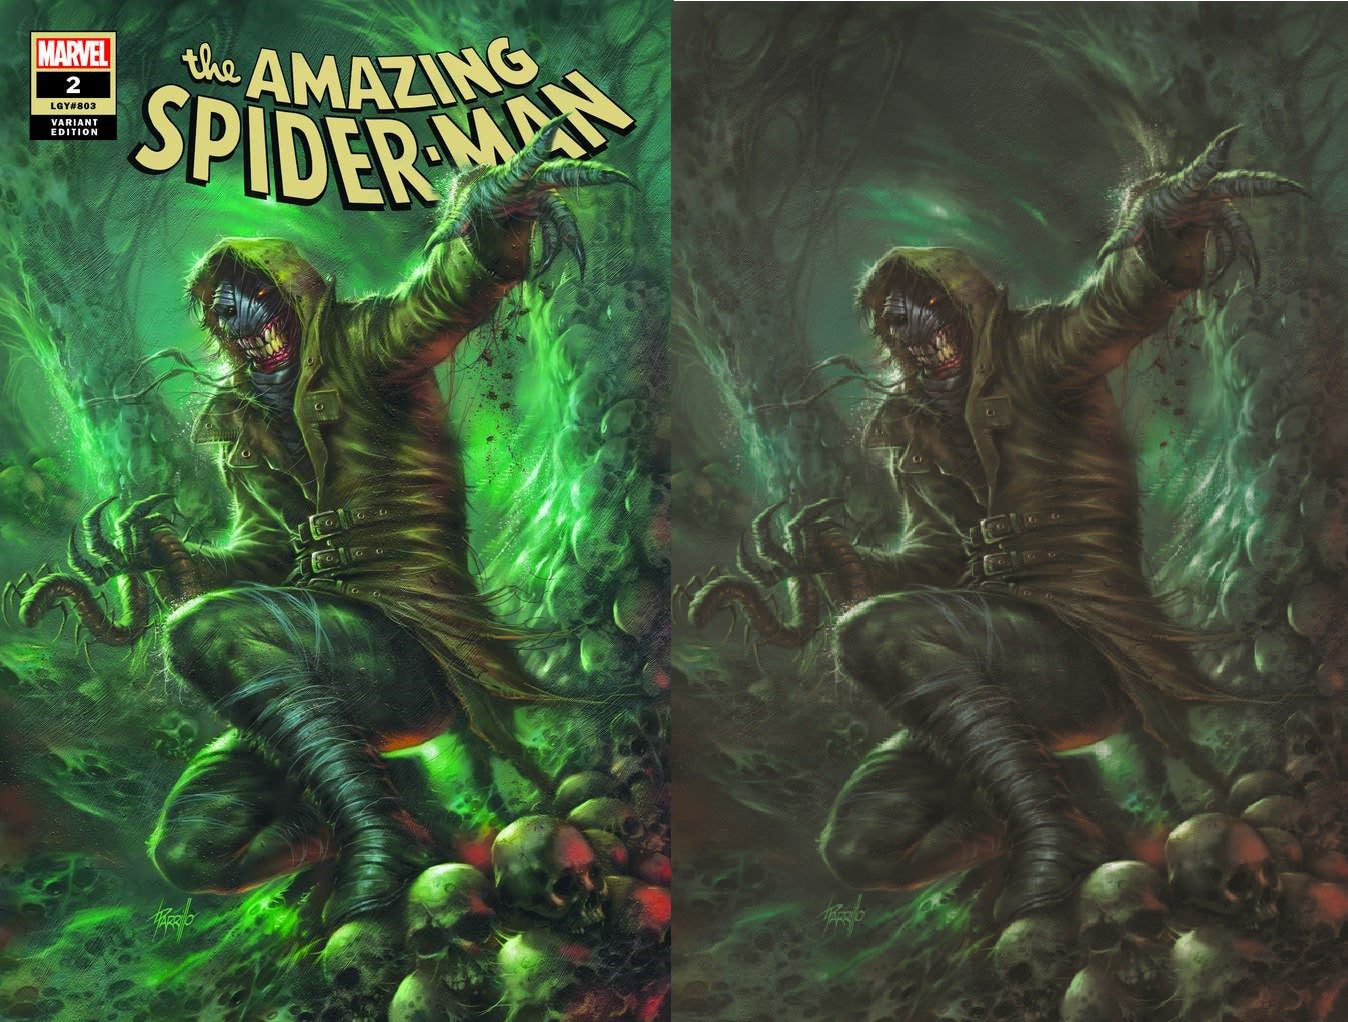 AMAZING SPIDER-MAN #2 LUCIO PARRILLO VARIANT TRADE/VIRGIN VARIANT SET LIMITED TO 1000 SETS